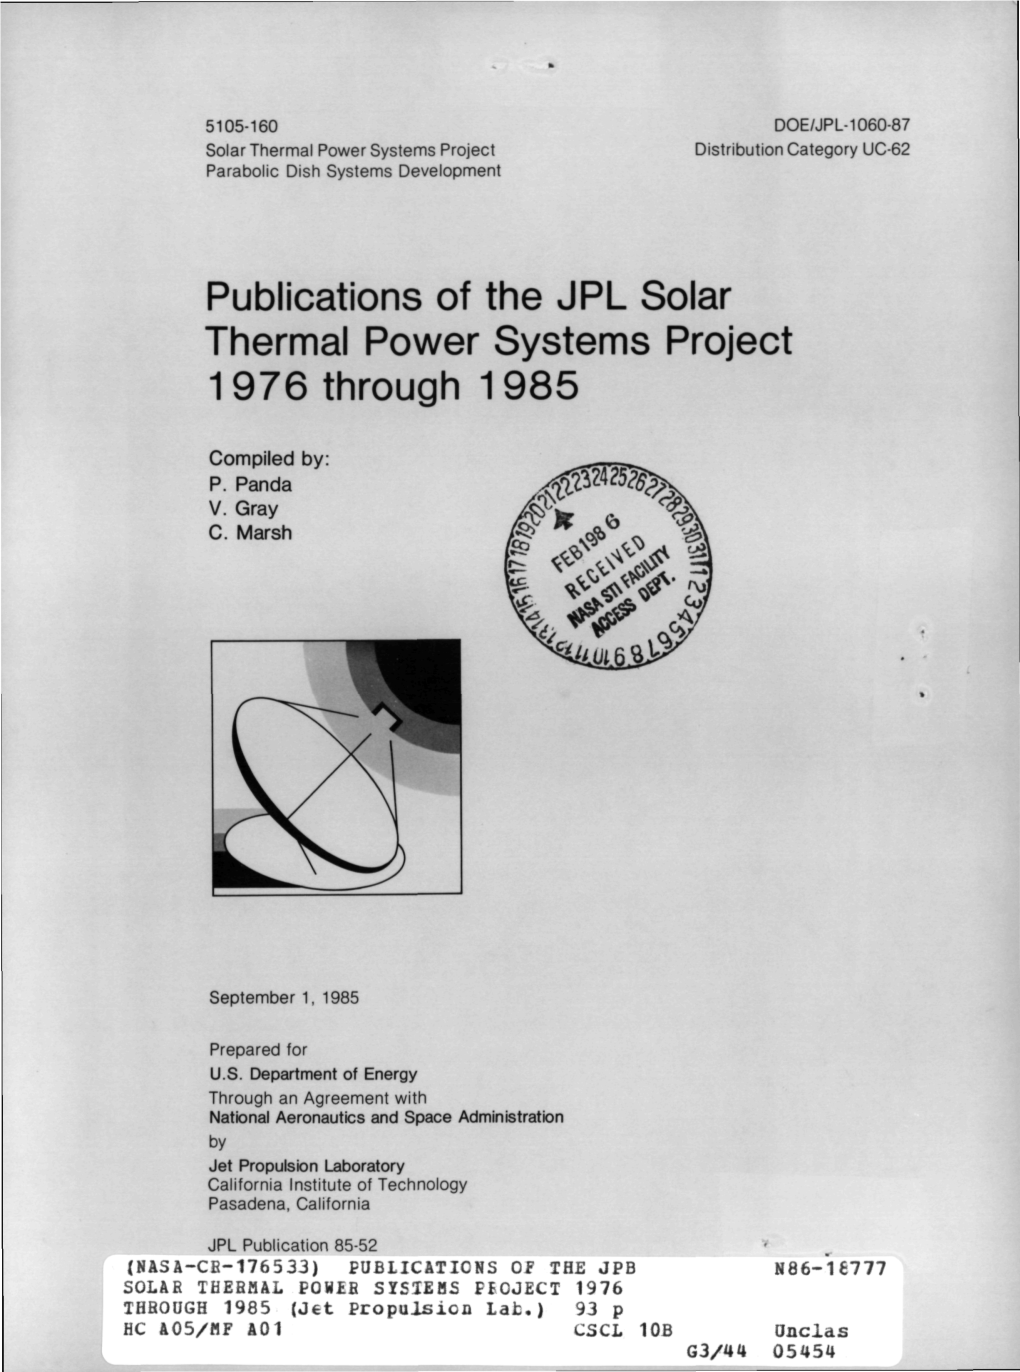 Publications of the JPL Solar Thermal Power Systems Project 1976 Through 1 985